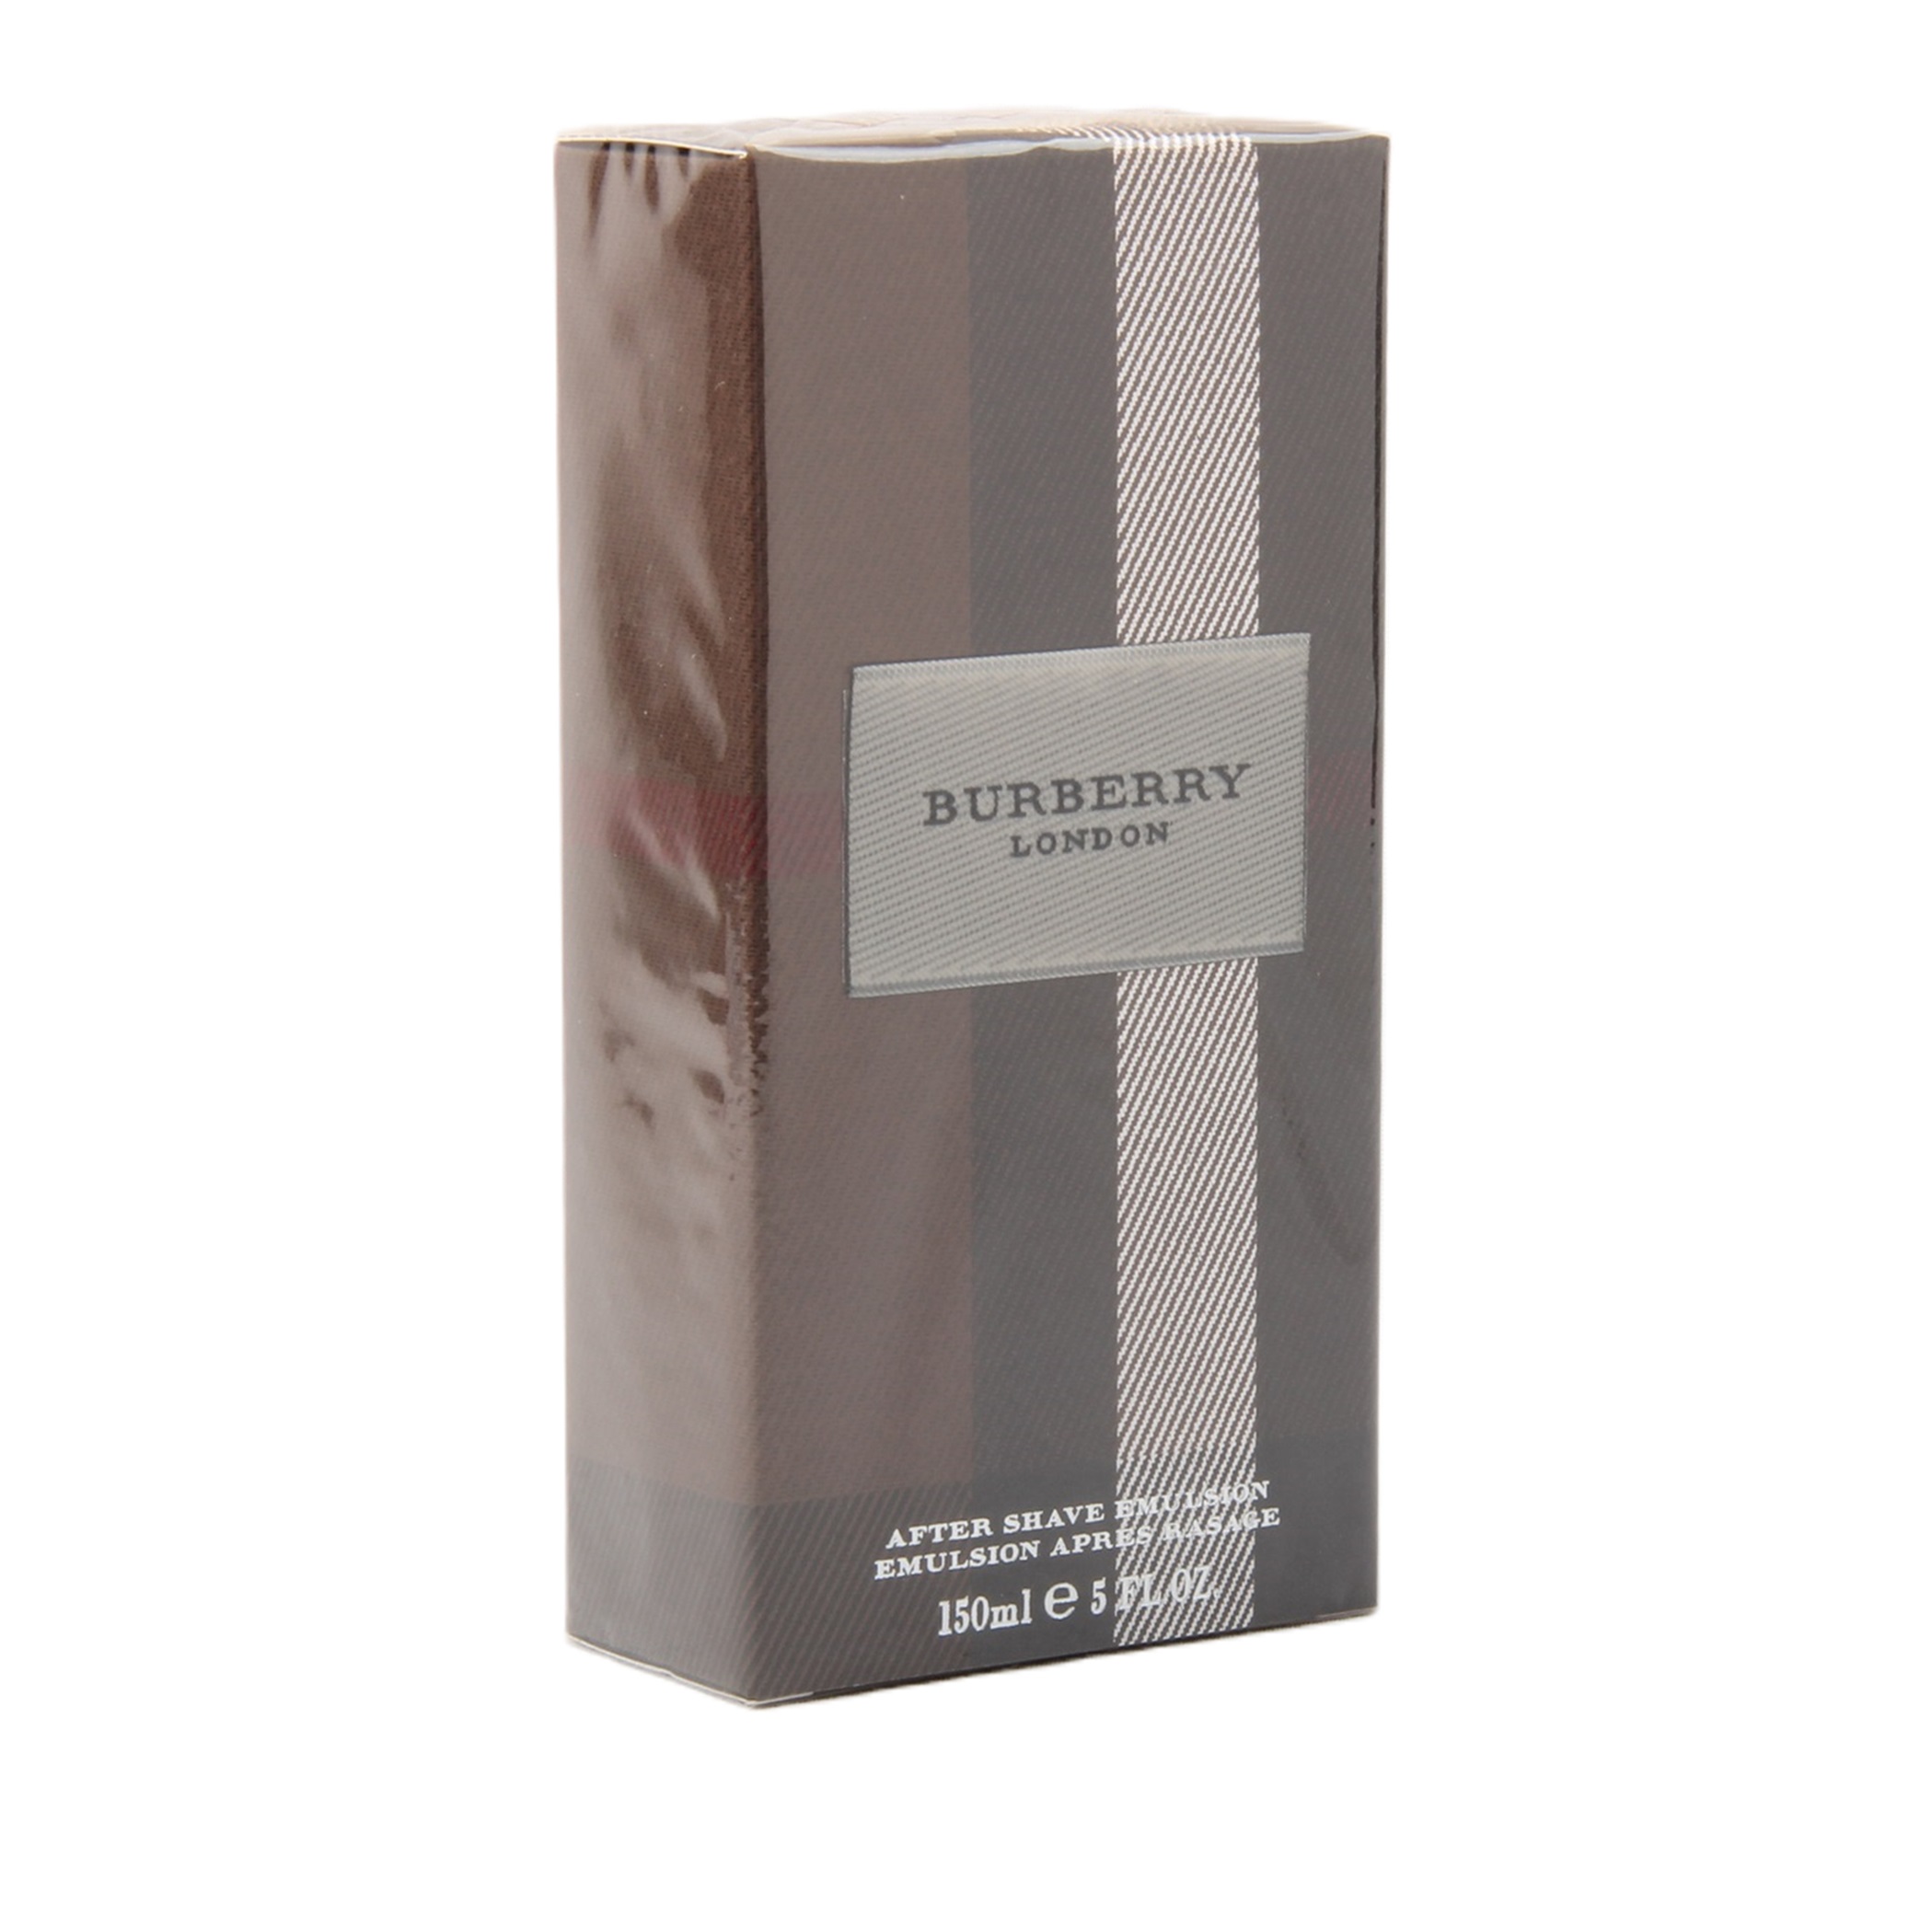 Burberry London After Shave Emulsion 150ml